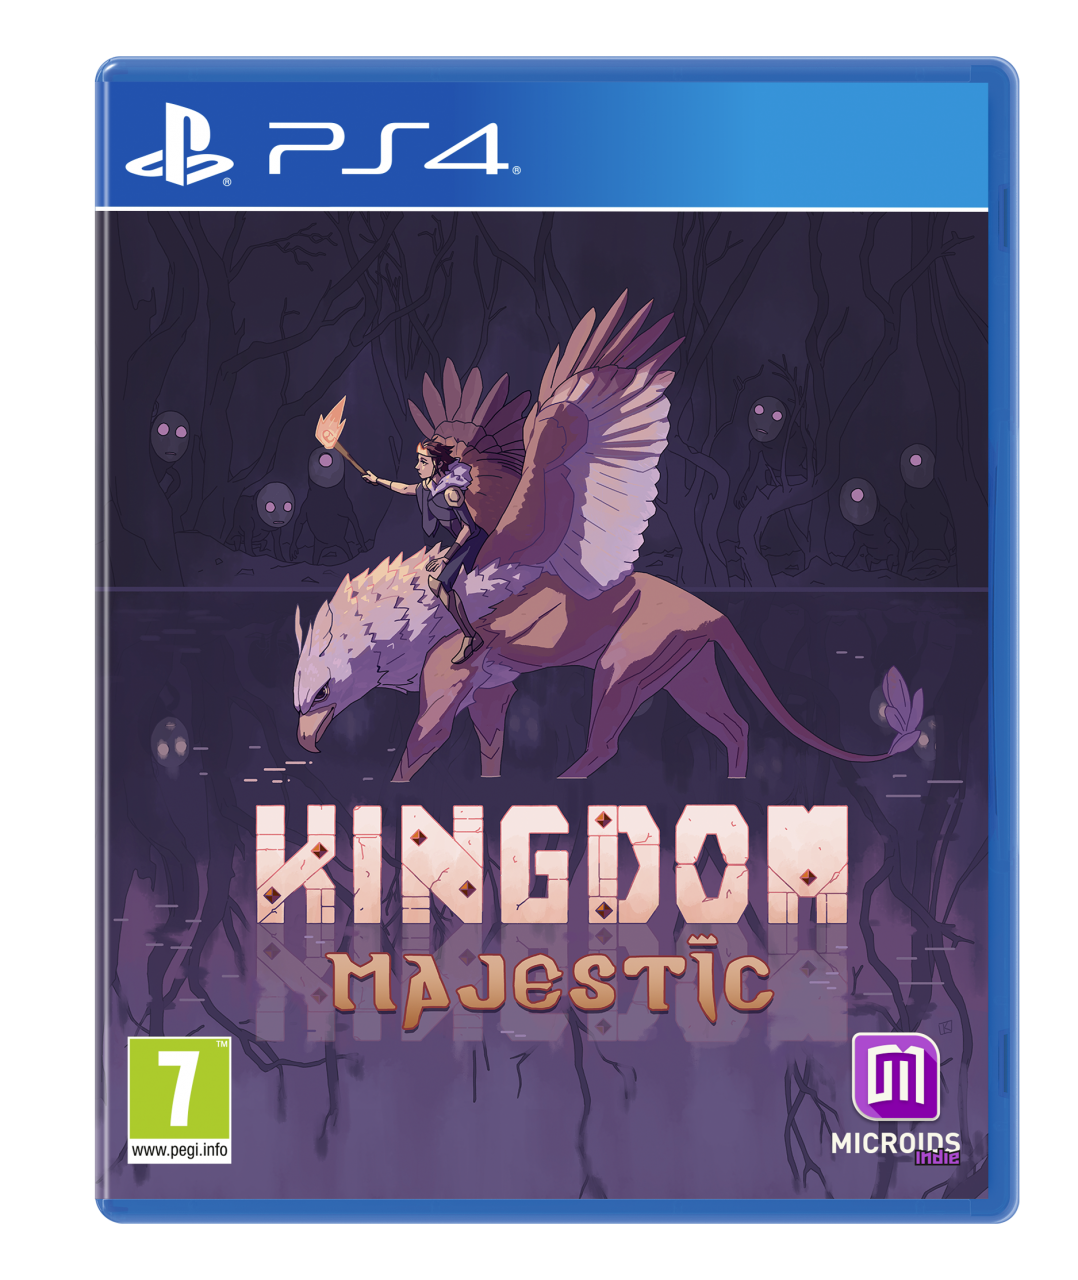 Kingdom Majestic PlayStation 4 cover (Microids)